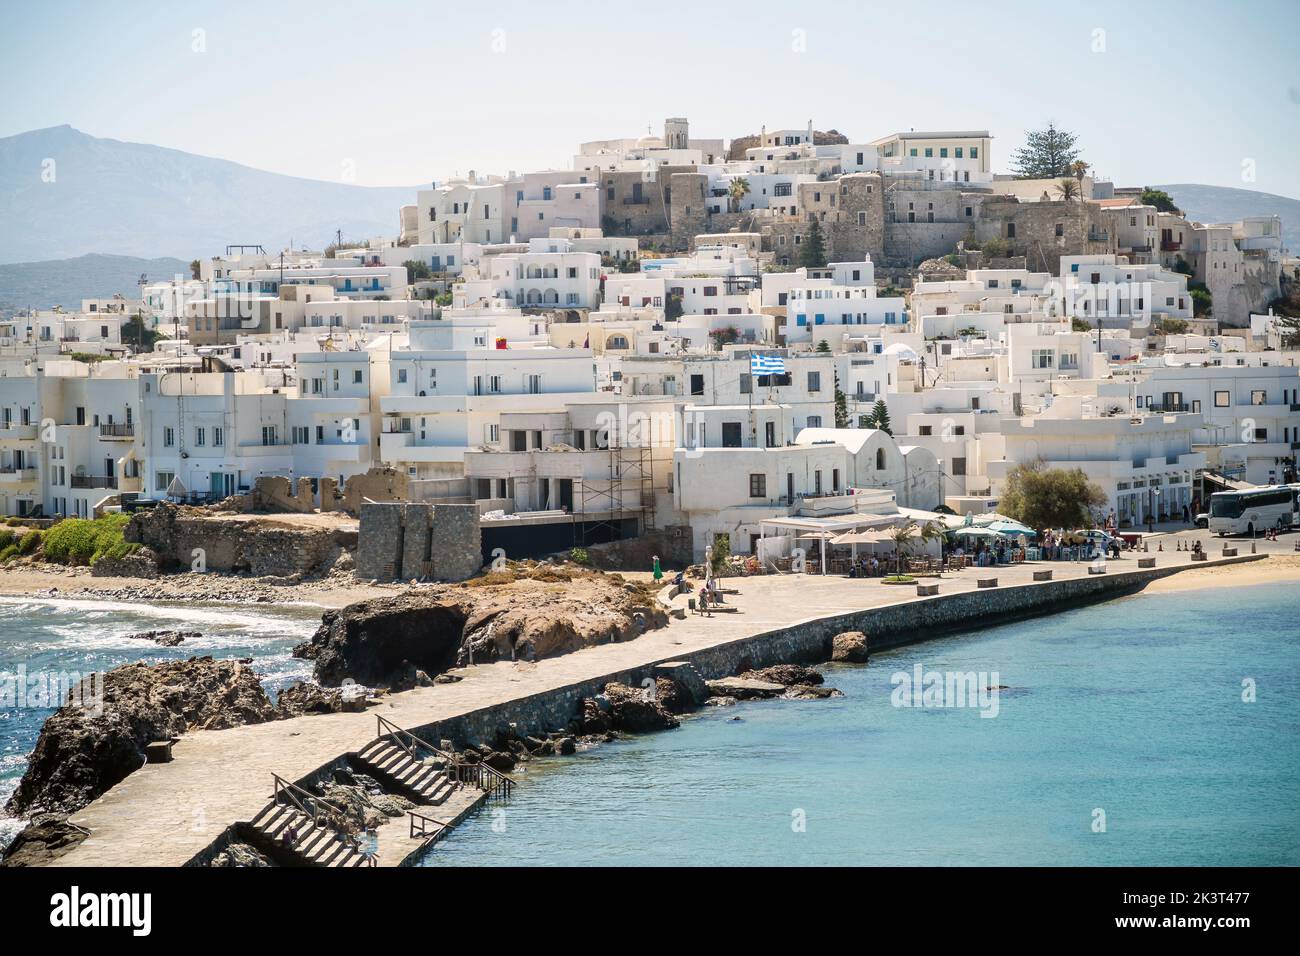 Greece, reaching Naxos harbor jetty, Cyclades islands. View from ship of traditional whitewashed houses perched on the hill. Stock Photo